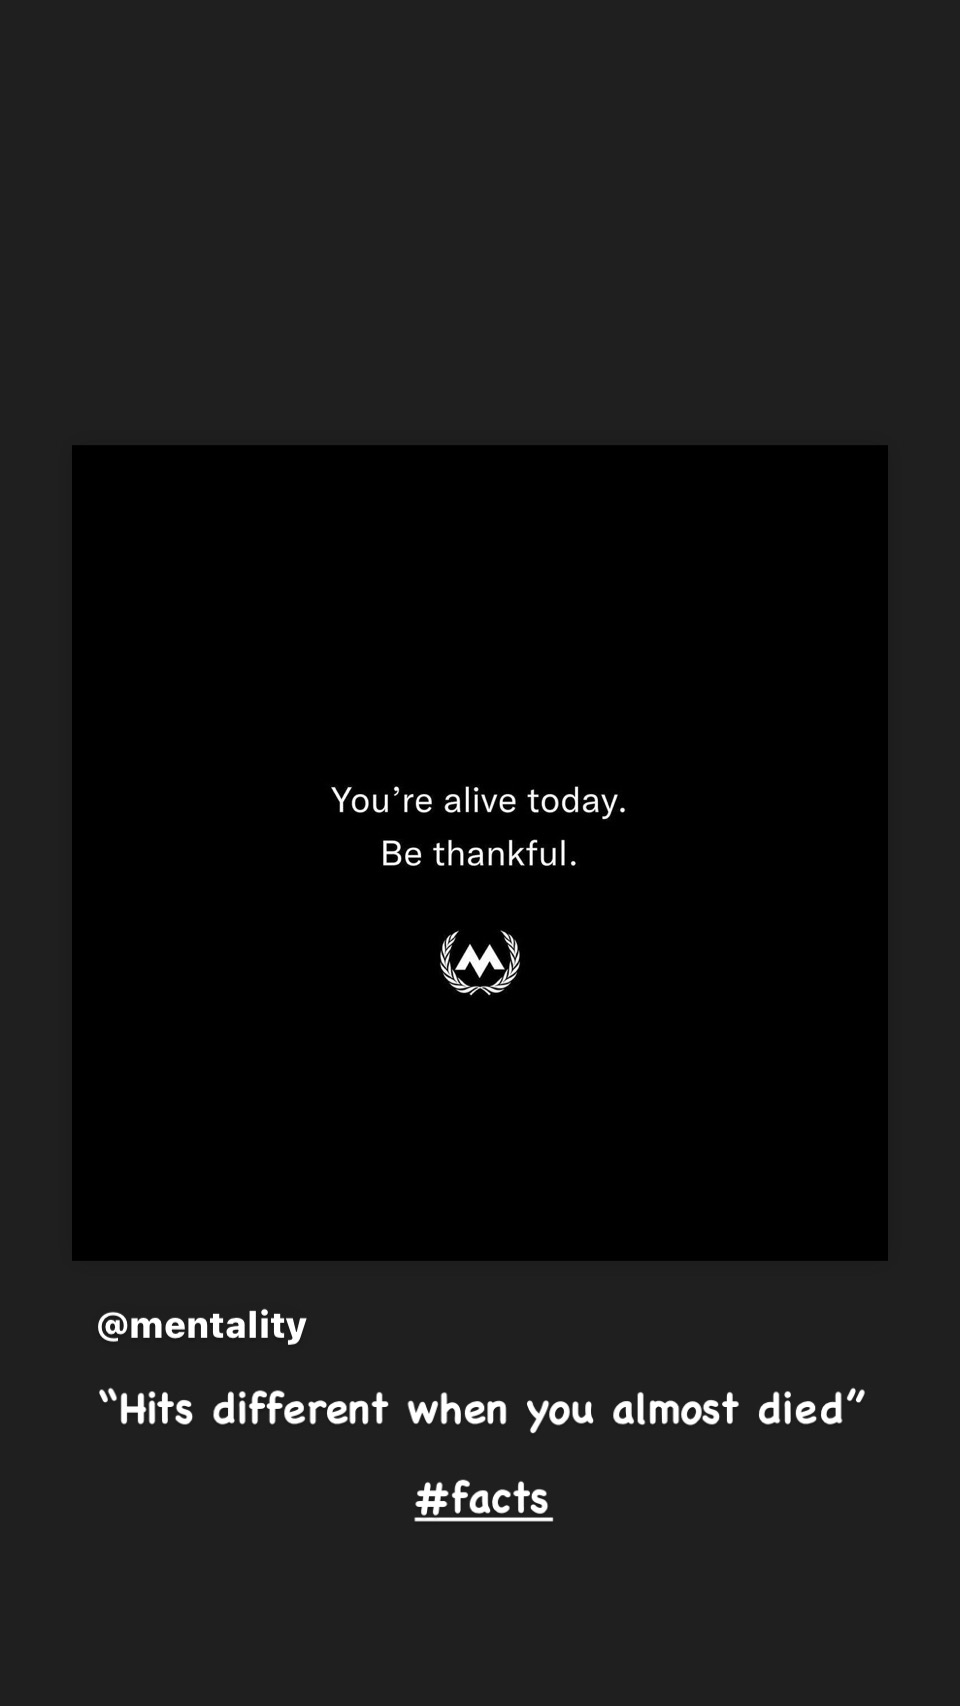 You're alive today. Be thankful.

Volleyball inspirational quotes from @mentality